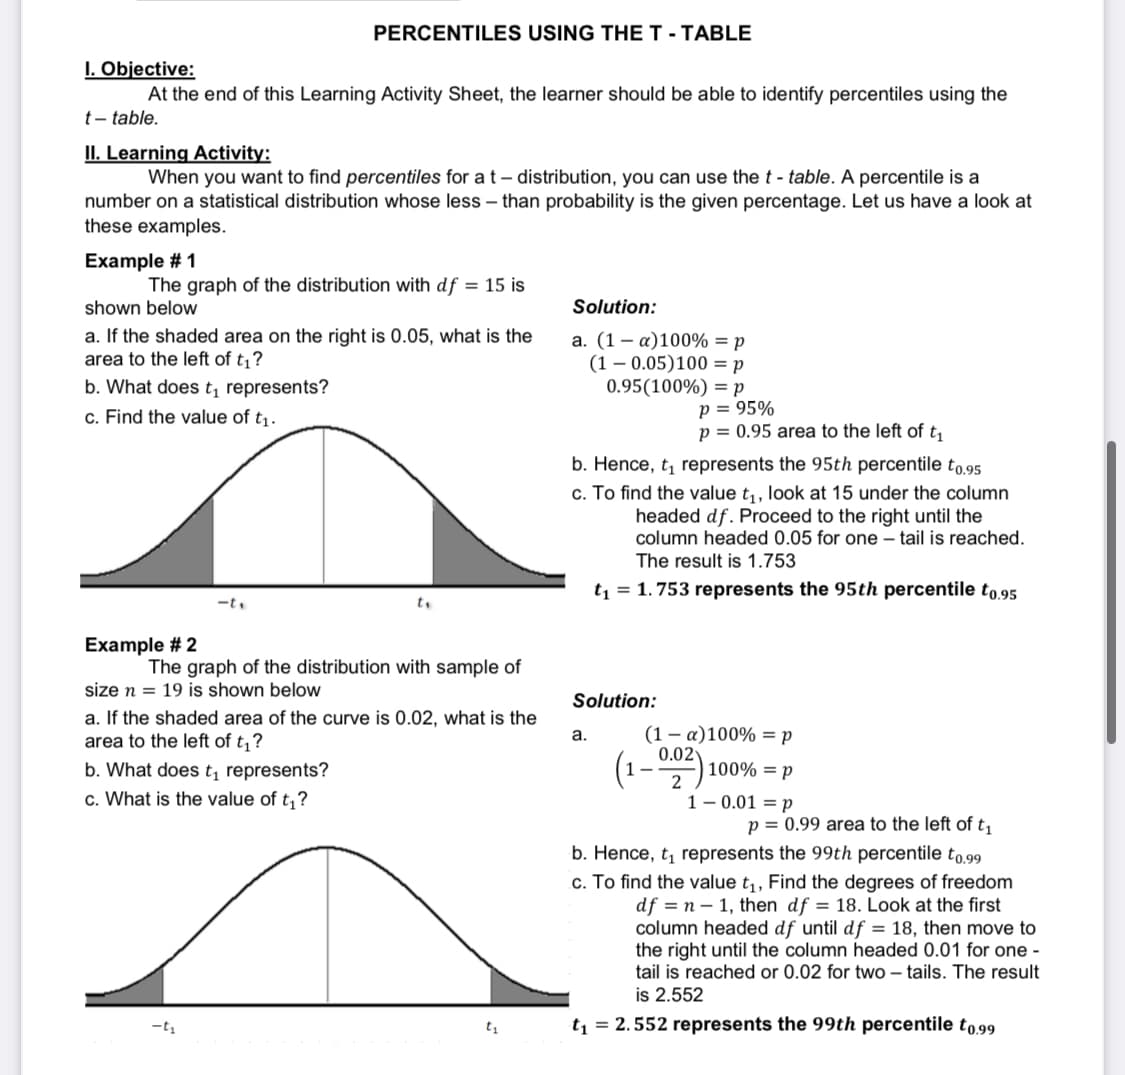 PERCENTILES USING THE T - TABLE
I. Objective:
At the end of this Learning Activity Sheet, the learner should be able to identify percentiles using the
t-table.
II. Learning Activity:
When you want to find percentiles for a t-distribution, you can use the t - table. A percentile is a
number on a statistical distribution whose less than probability is the given percentage. Let us have a look at
these examples.
Example # 1
The graph of the distribution with df = 15 is
shown below
Solution:
a. If the shaded area on the right is 0.05, what is the
area to the left of t₁?
a. (1 a)100% = p
(10.05)100 = p
b. What does t₁ represents?
0.95(100%) p
c. Find the value of t₁.
P = 95%
p = 0.95 area to the left of t₁
b. Hence, t₁ represents the 95th percentile to.95
c. To find the value t₁, look at 15 under the column
headed df. Proceed to the right until the
column headed 0.05 for one - tail is reached.
The result is 1.753
t₁ = 1.753 represents the 95th percentile to.95
-t₁
t₁
Example # 2
The graph of the distribution with sample of
size n 19 is shown below
Solution:
a. If the shaded area of the curve is 0.02, what is the
area to the left of t₁?
a.
(1 a)100% = p
0.02
b. What does t₁ represents?
100% P
2
c. What is the value of t₁?
1-0.01 = p
p = 0.99 area to the left of t₁
b. Hence, t₁ represents the 99th percentile to.99
c. To find the value t₁, Find the degrees of freedom
df = n1, then df = 18. Look at the first
column headed df until df = 18, then move to
the right until the column headed 0.01 for one -
tail is reached or 0.02 for two-tails. The result
is 2.552
t₁ = 2.552 represents the 99th percentile t0.99
5
t₁